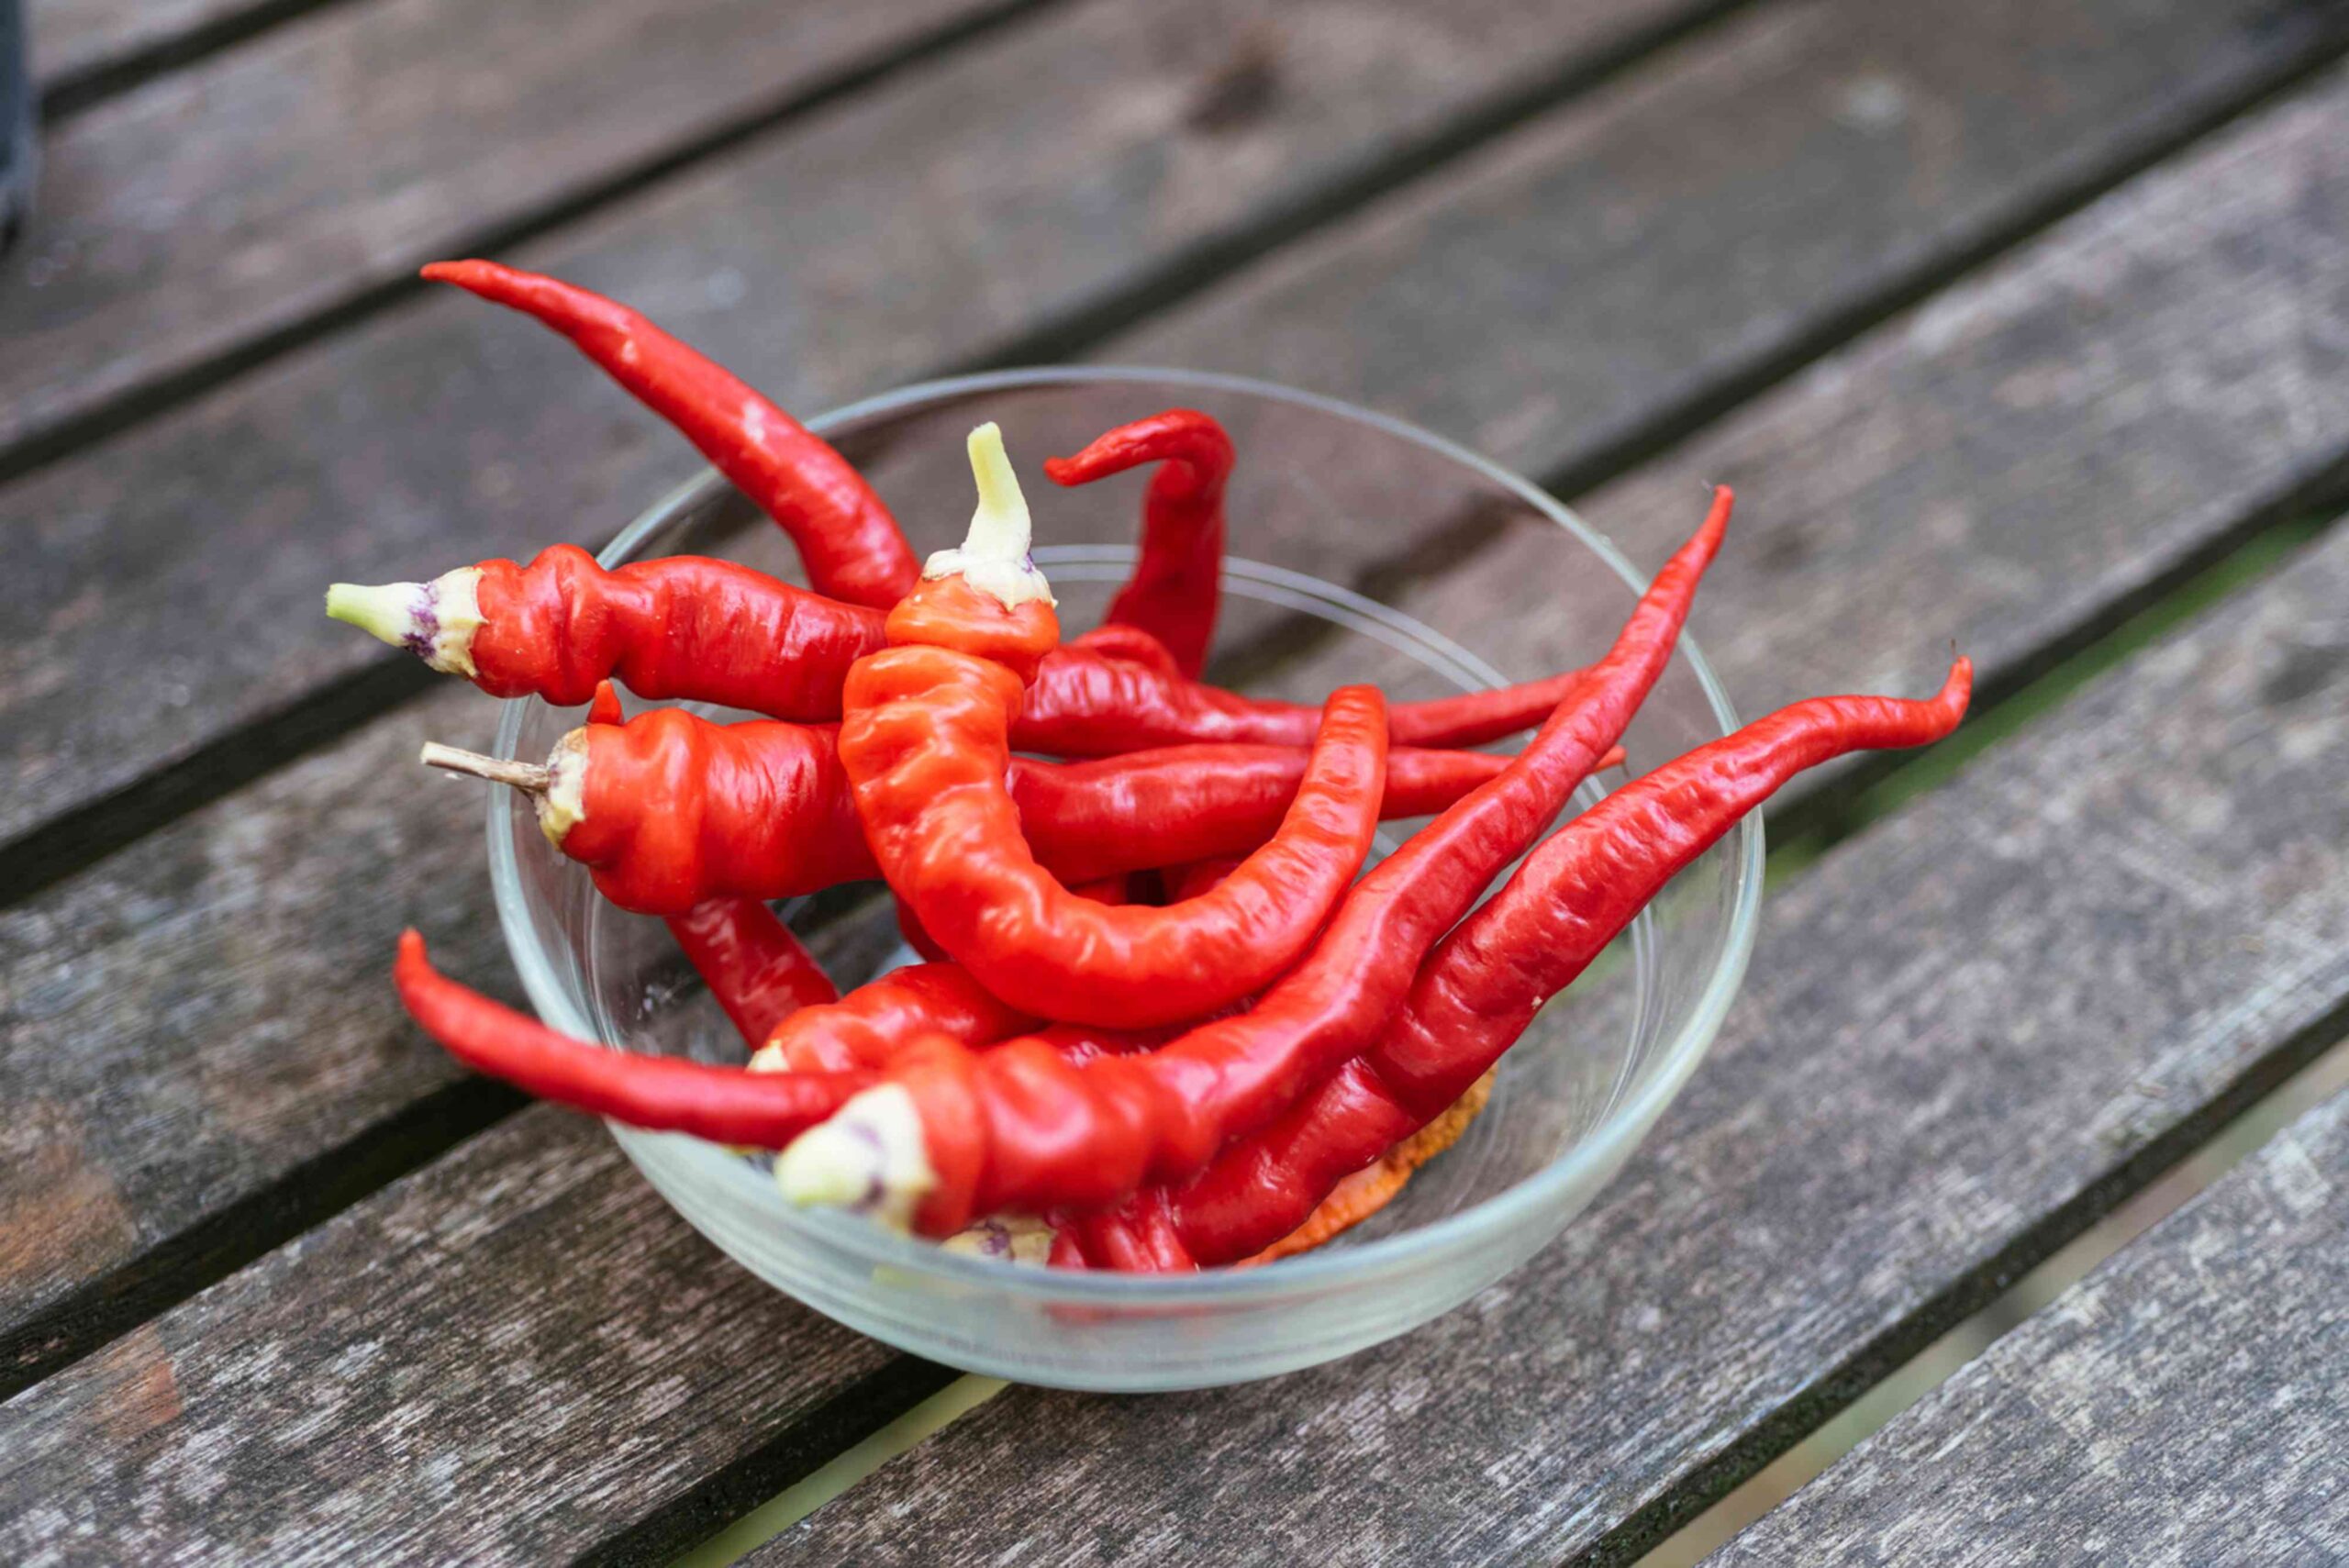 Cayenne Pepper: Benefits, Nutrition, and Risks